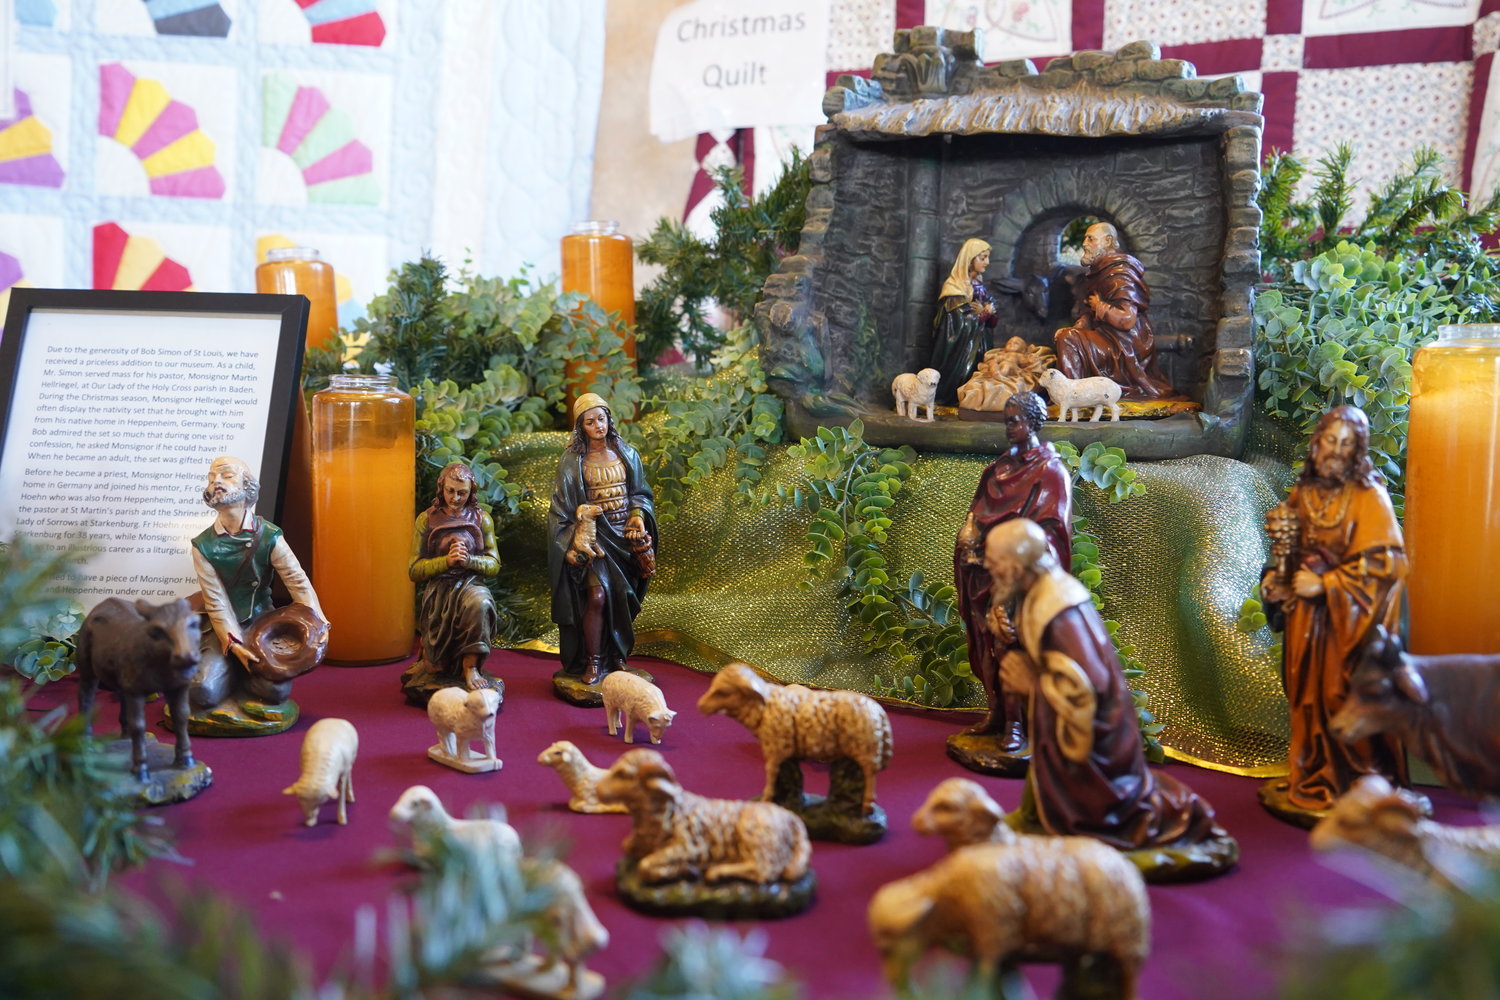 This Nativity scene from the early 1900s was originally given to Monsignor Martin Hellriegel by his parents. He later gave it Bob Simon, a friend and parishioner at Holy Cross Parish in St. Louis. Mr. Simon recently donated it to the Shrine of Our Lady of Sorrows in Starkenburg, where Msgr. Hellreigel offered his First Solemn Mass in 1914.